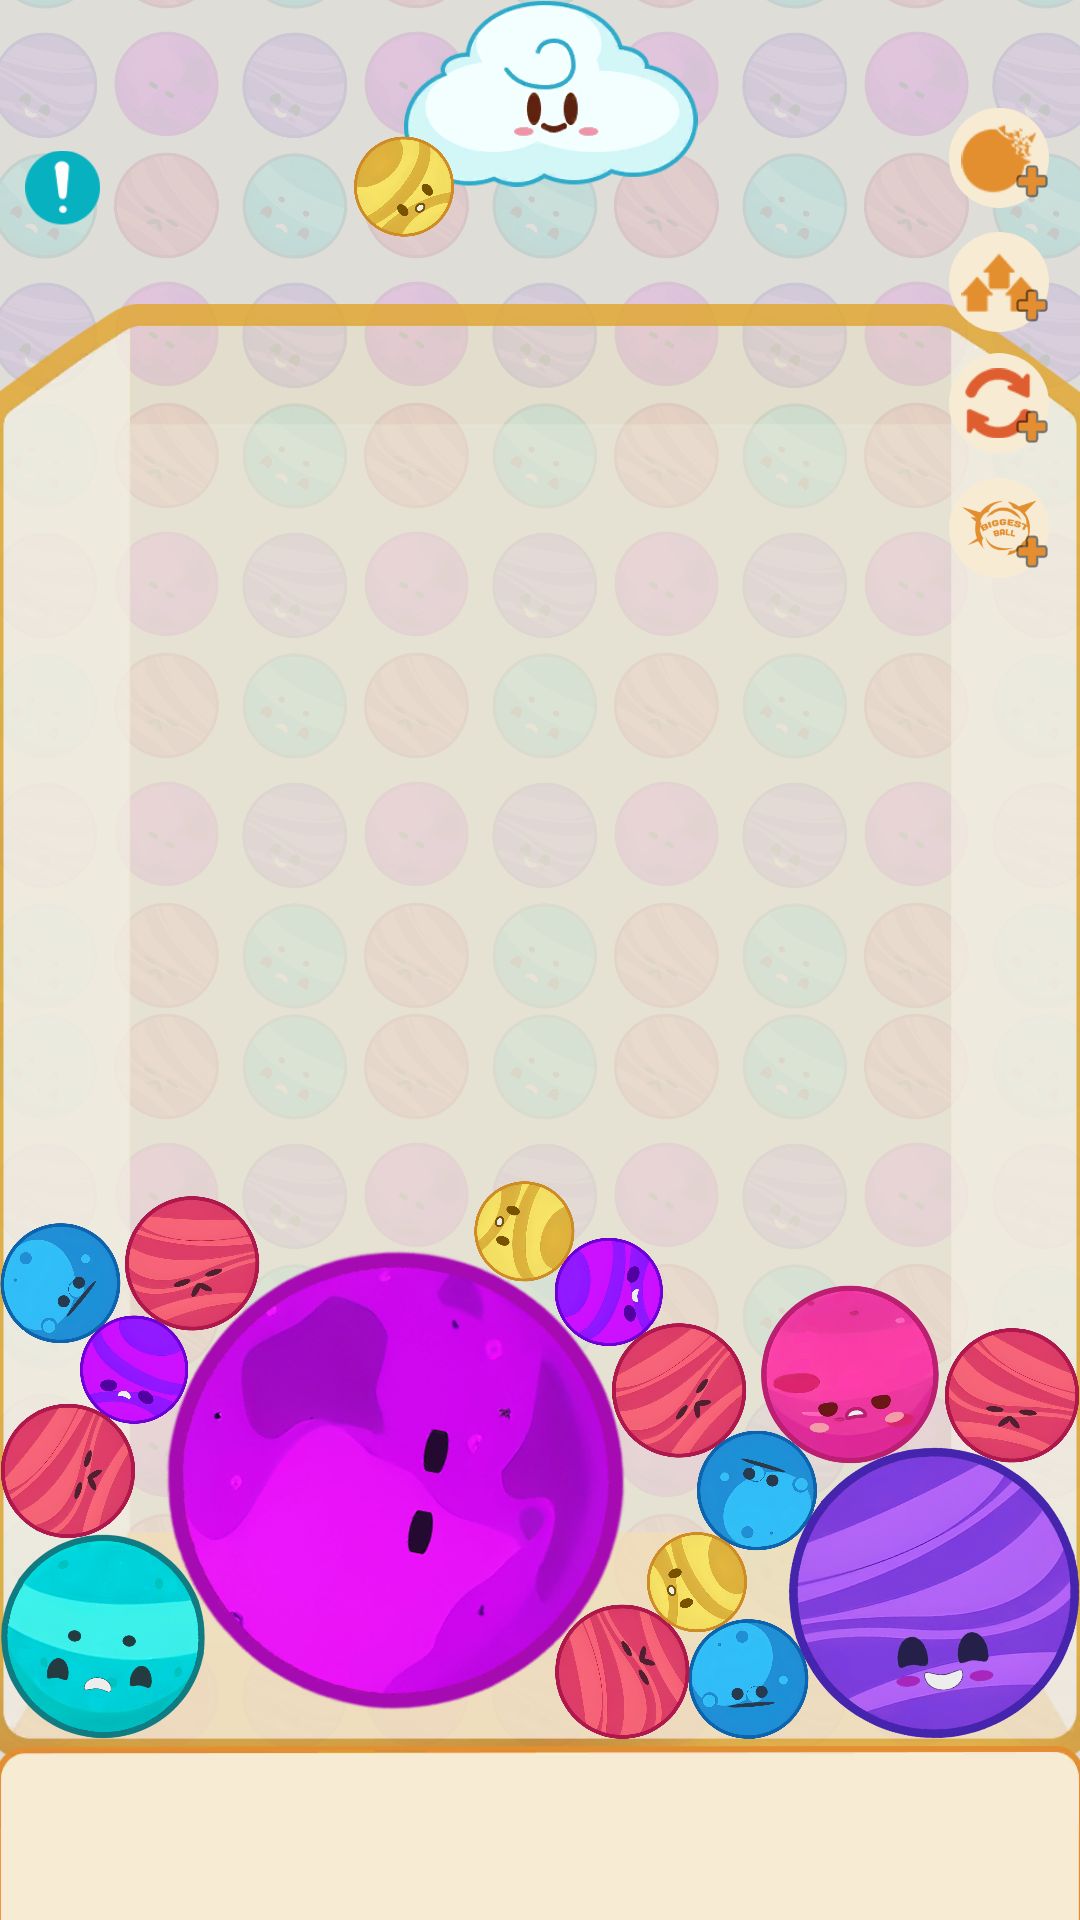 Watermelon Chill: Fruit Drop - Android game screenshots.